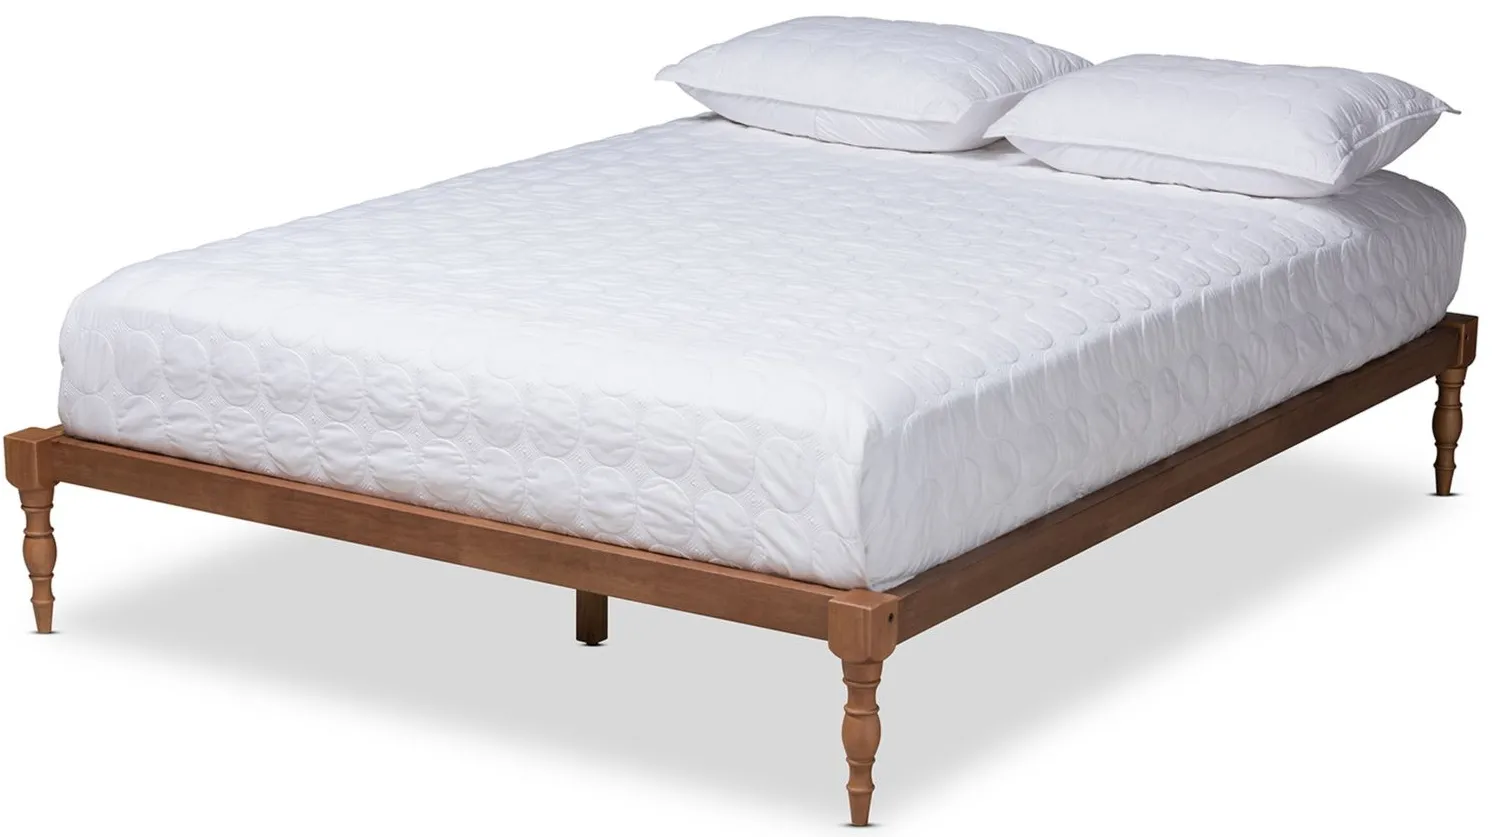 Iseline King Size Platform Bed Frame in Walnut by Wholesale Interiors